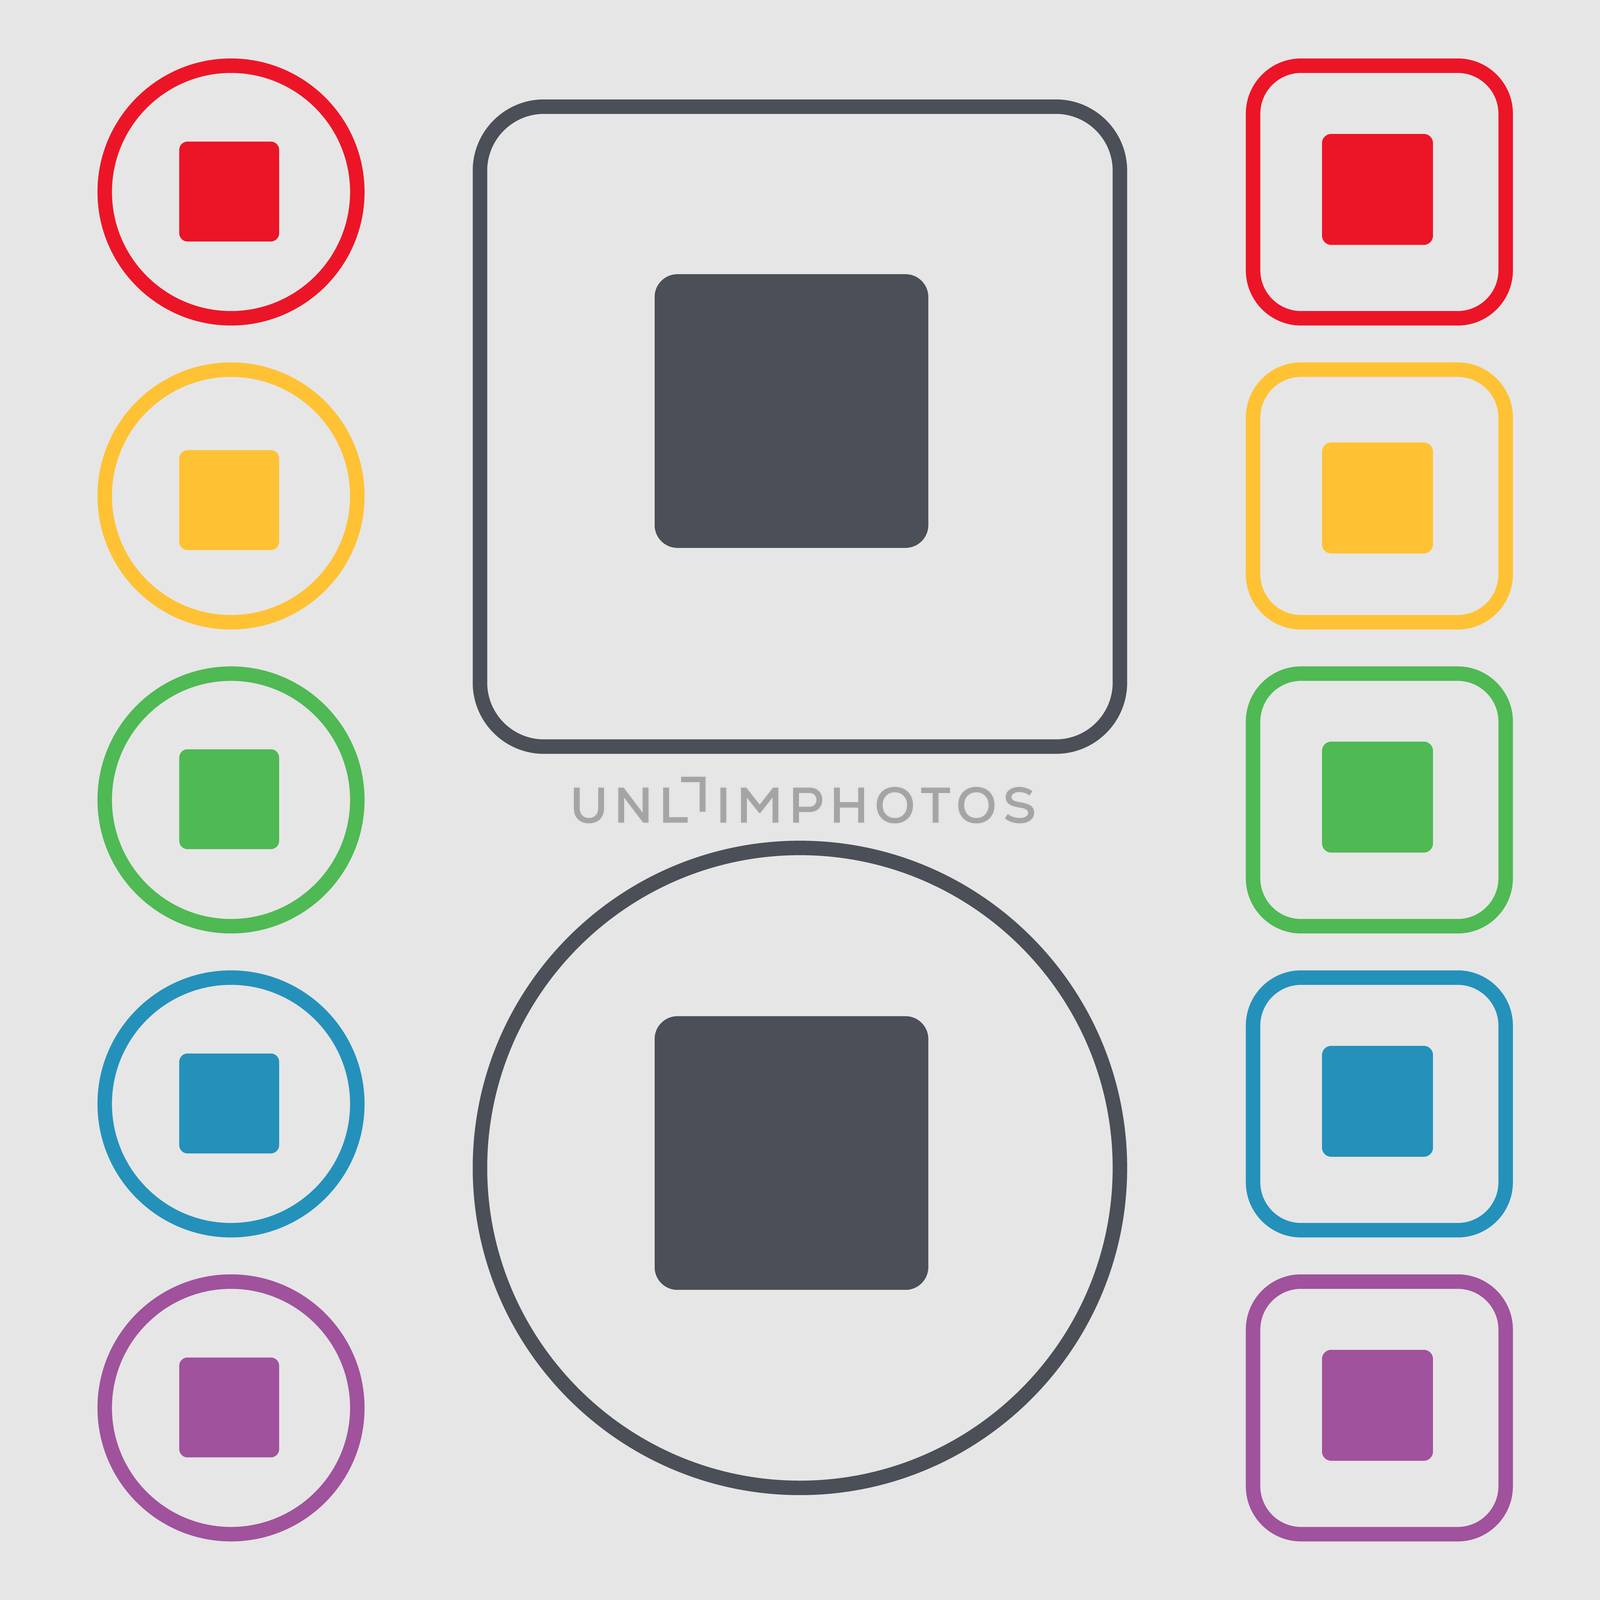 stop button icon sign. symbol on the Round and square buttons with frame. illustration